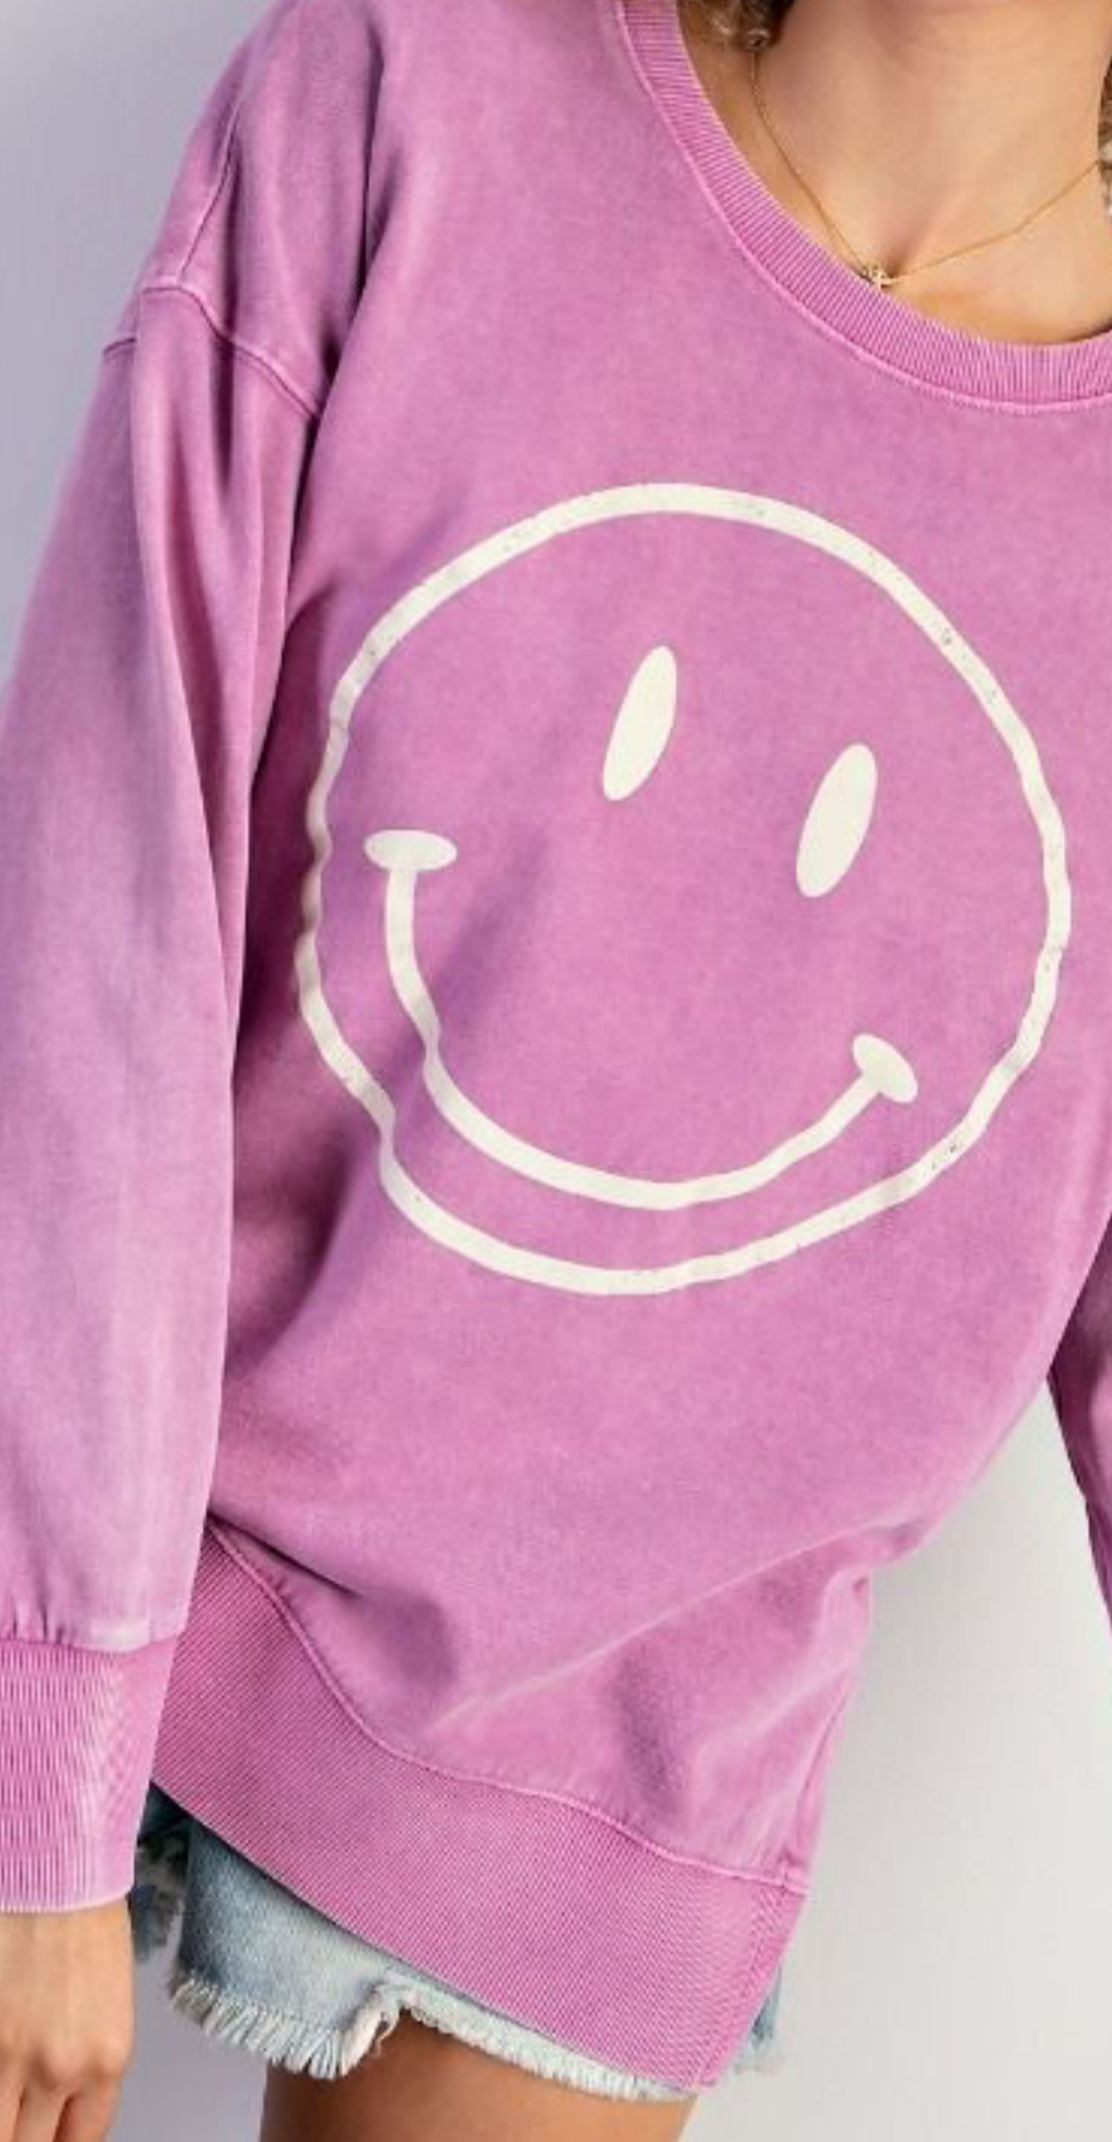 Smiley Face Sweatshirt by Easel